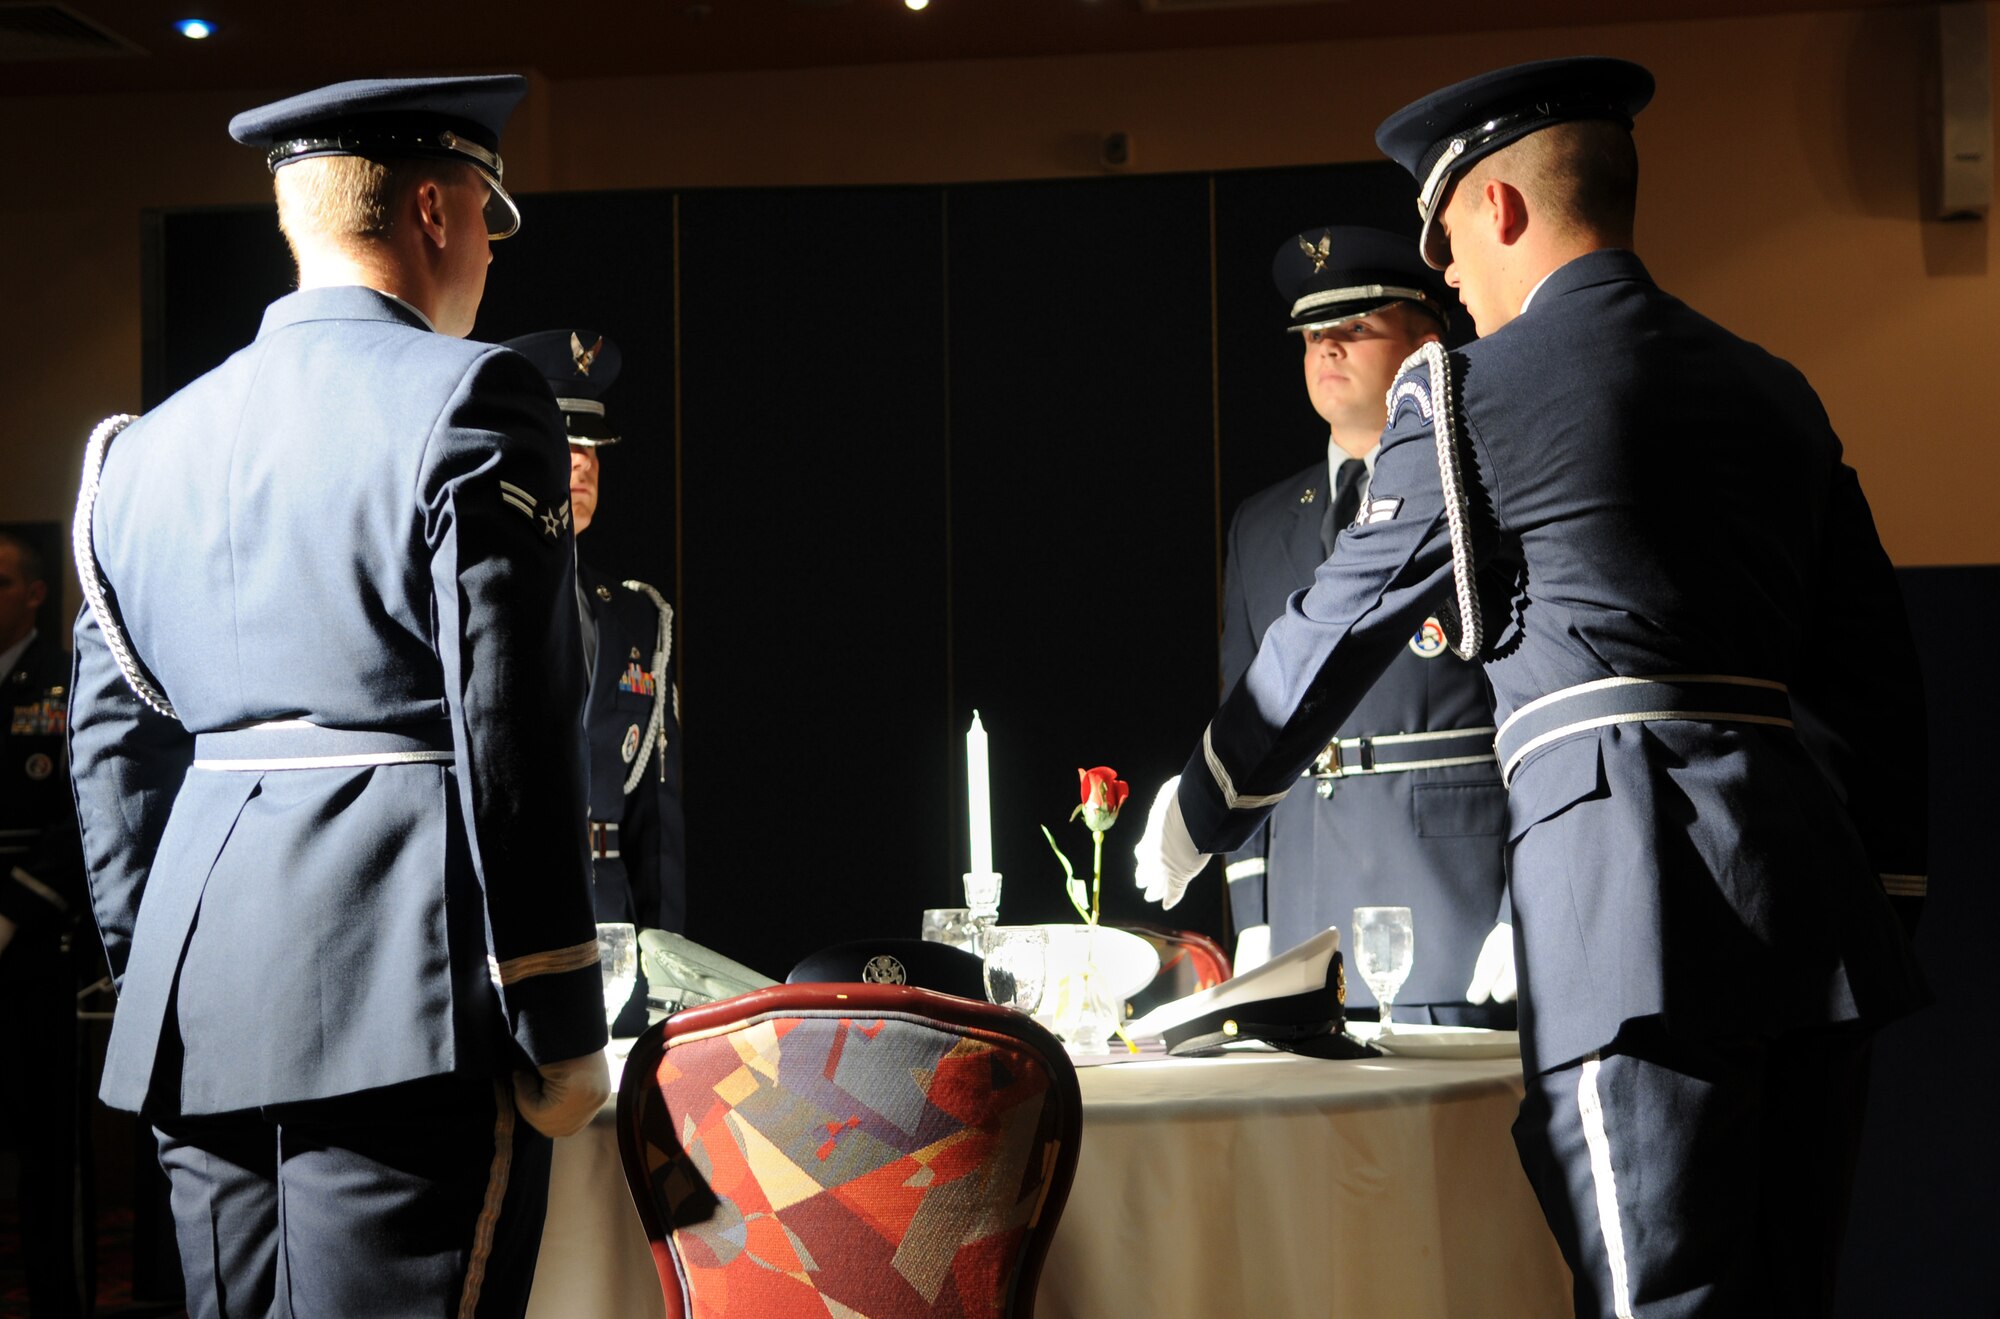 RAF MILDENHALL, England -- Members of the RAF Mildenhall Honor Guard perform the missing man table ceremony at the Prisoner of War/Missing in Action Remembrance Luncheon at the Galaxy Club here Sept. 16. During the luncheon, two former Royal Air Force servicemembers, as guest speakers, recounted the events of their capture and detention in Germany during World War II. (U.S. Air Force photo/Senior Airman Thomas Trower)